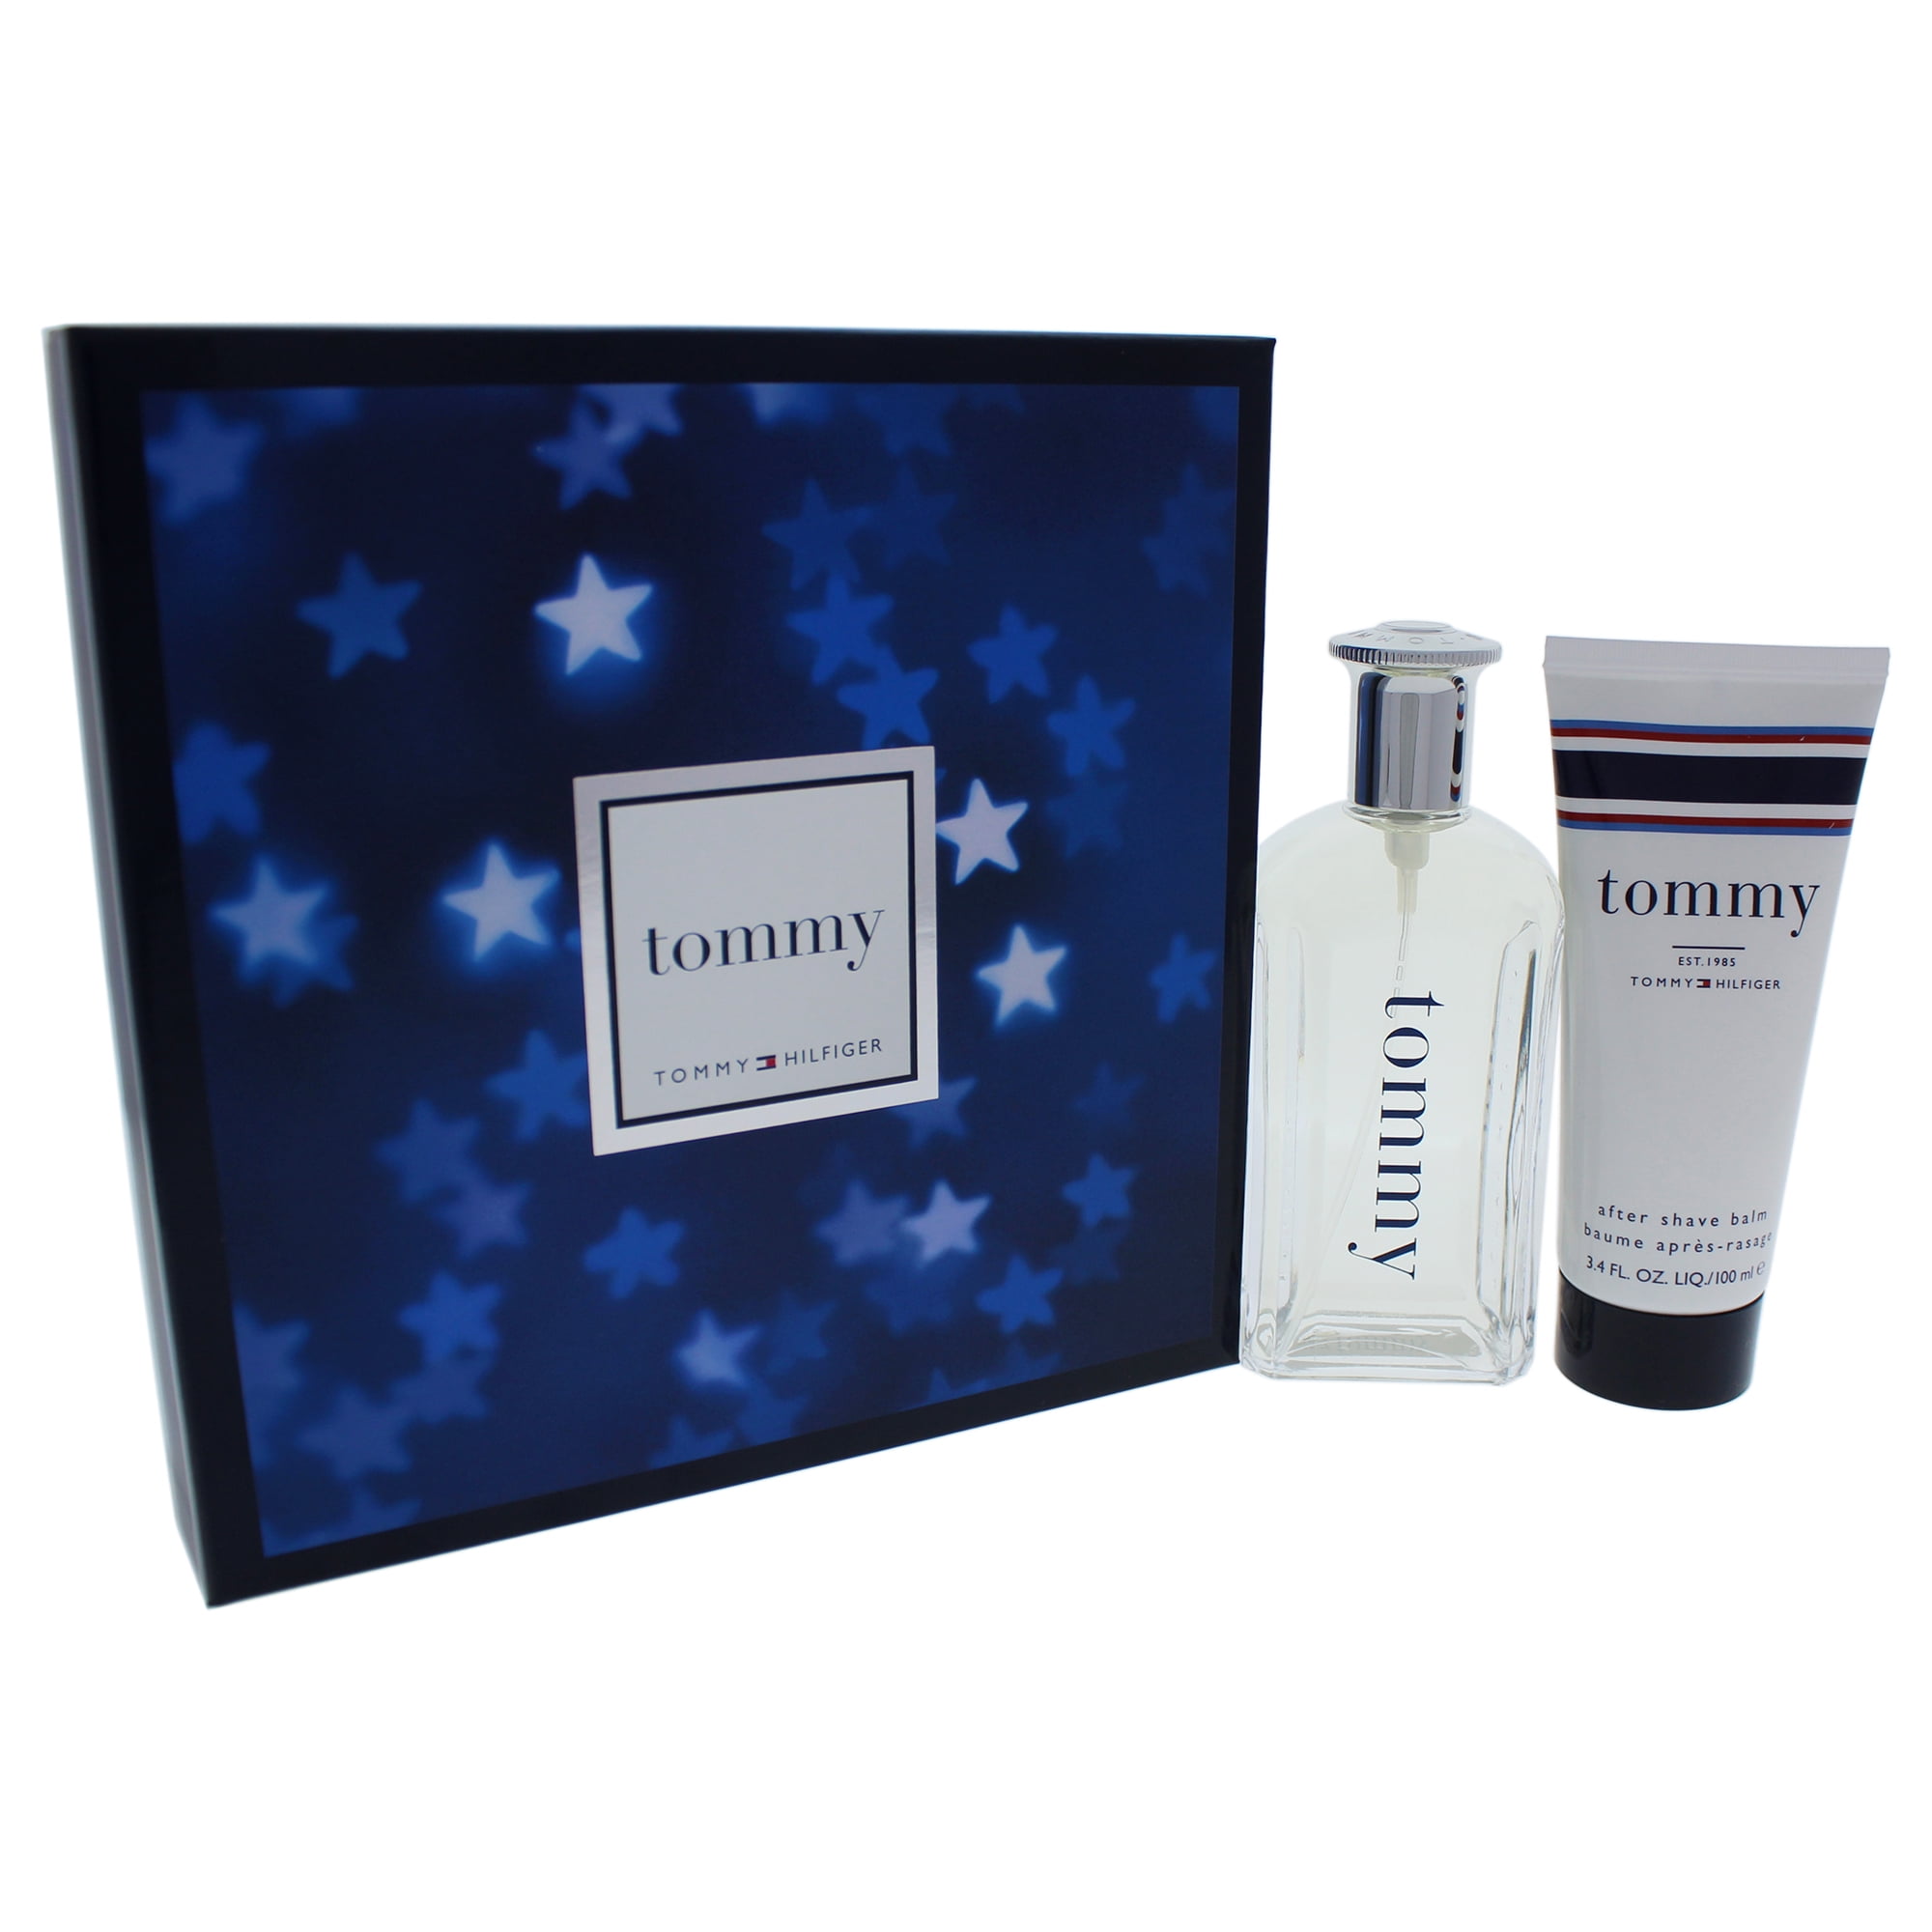 Tommy by Tommy Hilfiger for Men 